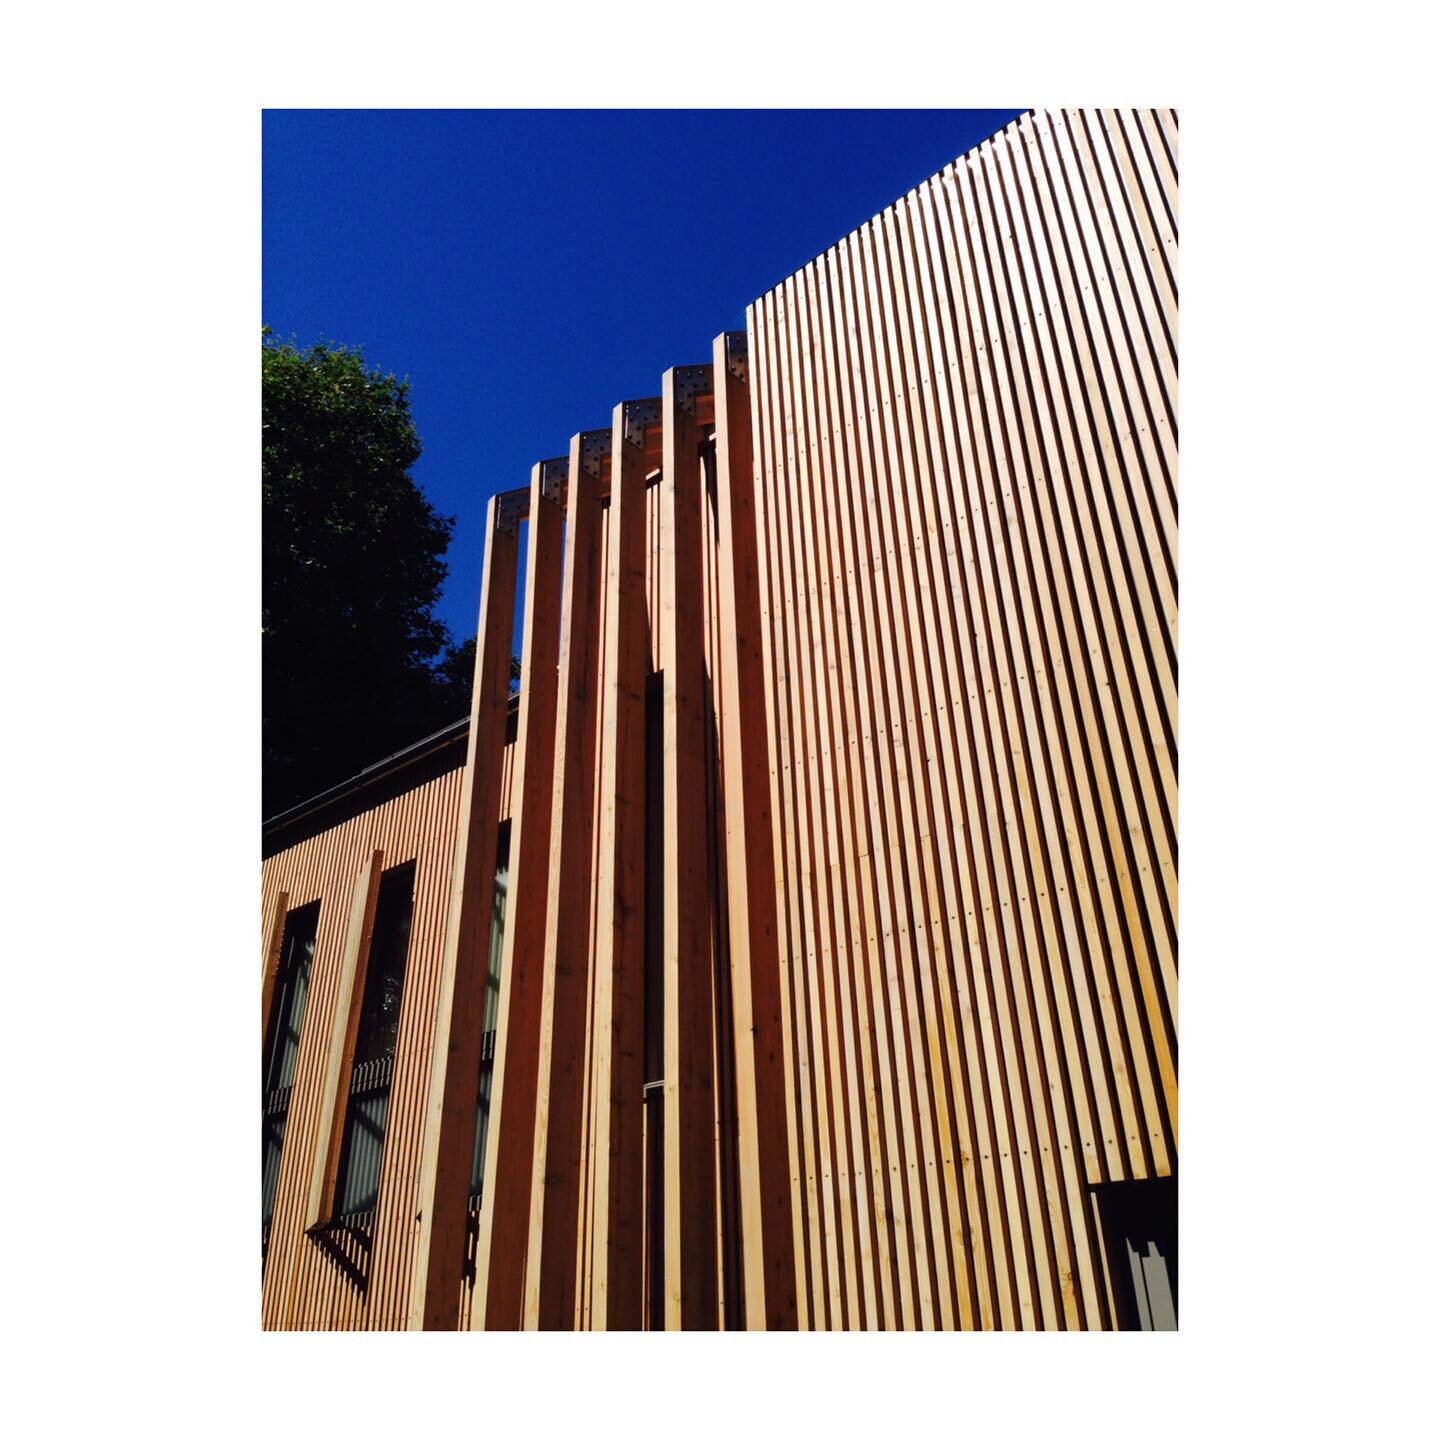 Very lovely larch cladding on this back-plot new build family house we completed in Hackney 
📸@michbt
#hackney #design #newbuildhome #london #larchcladding